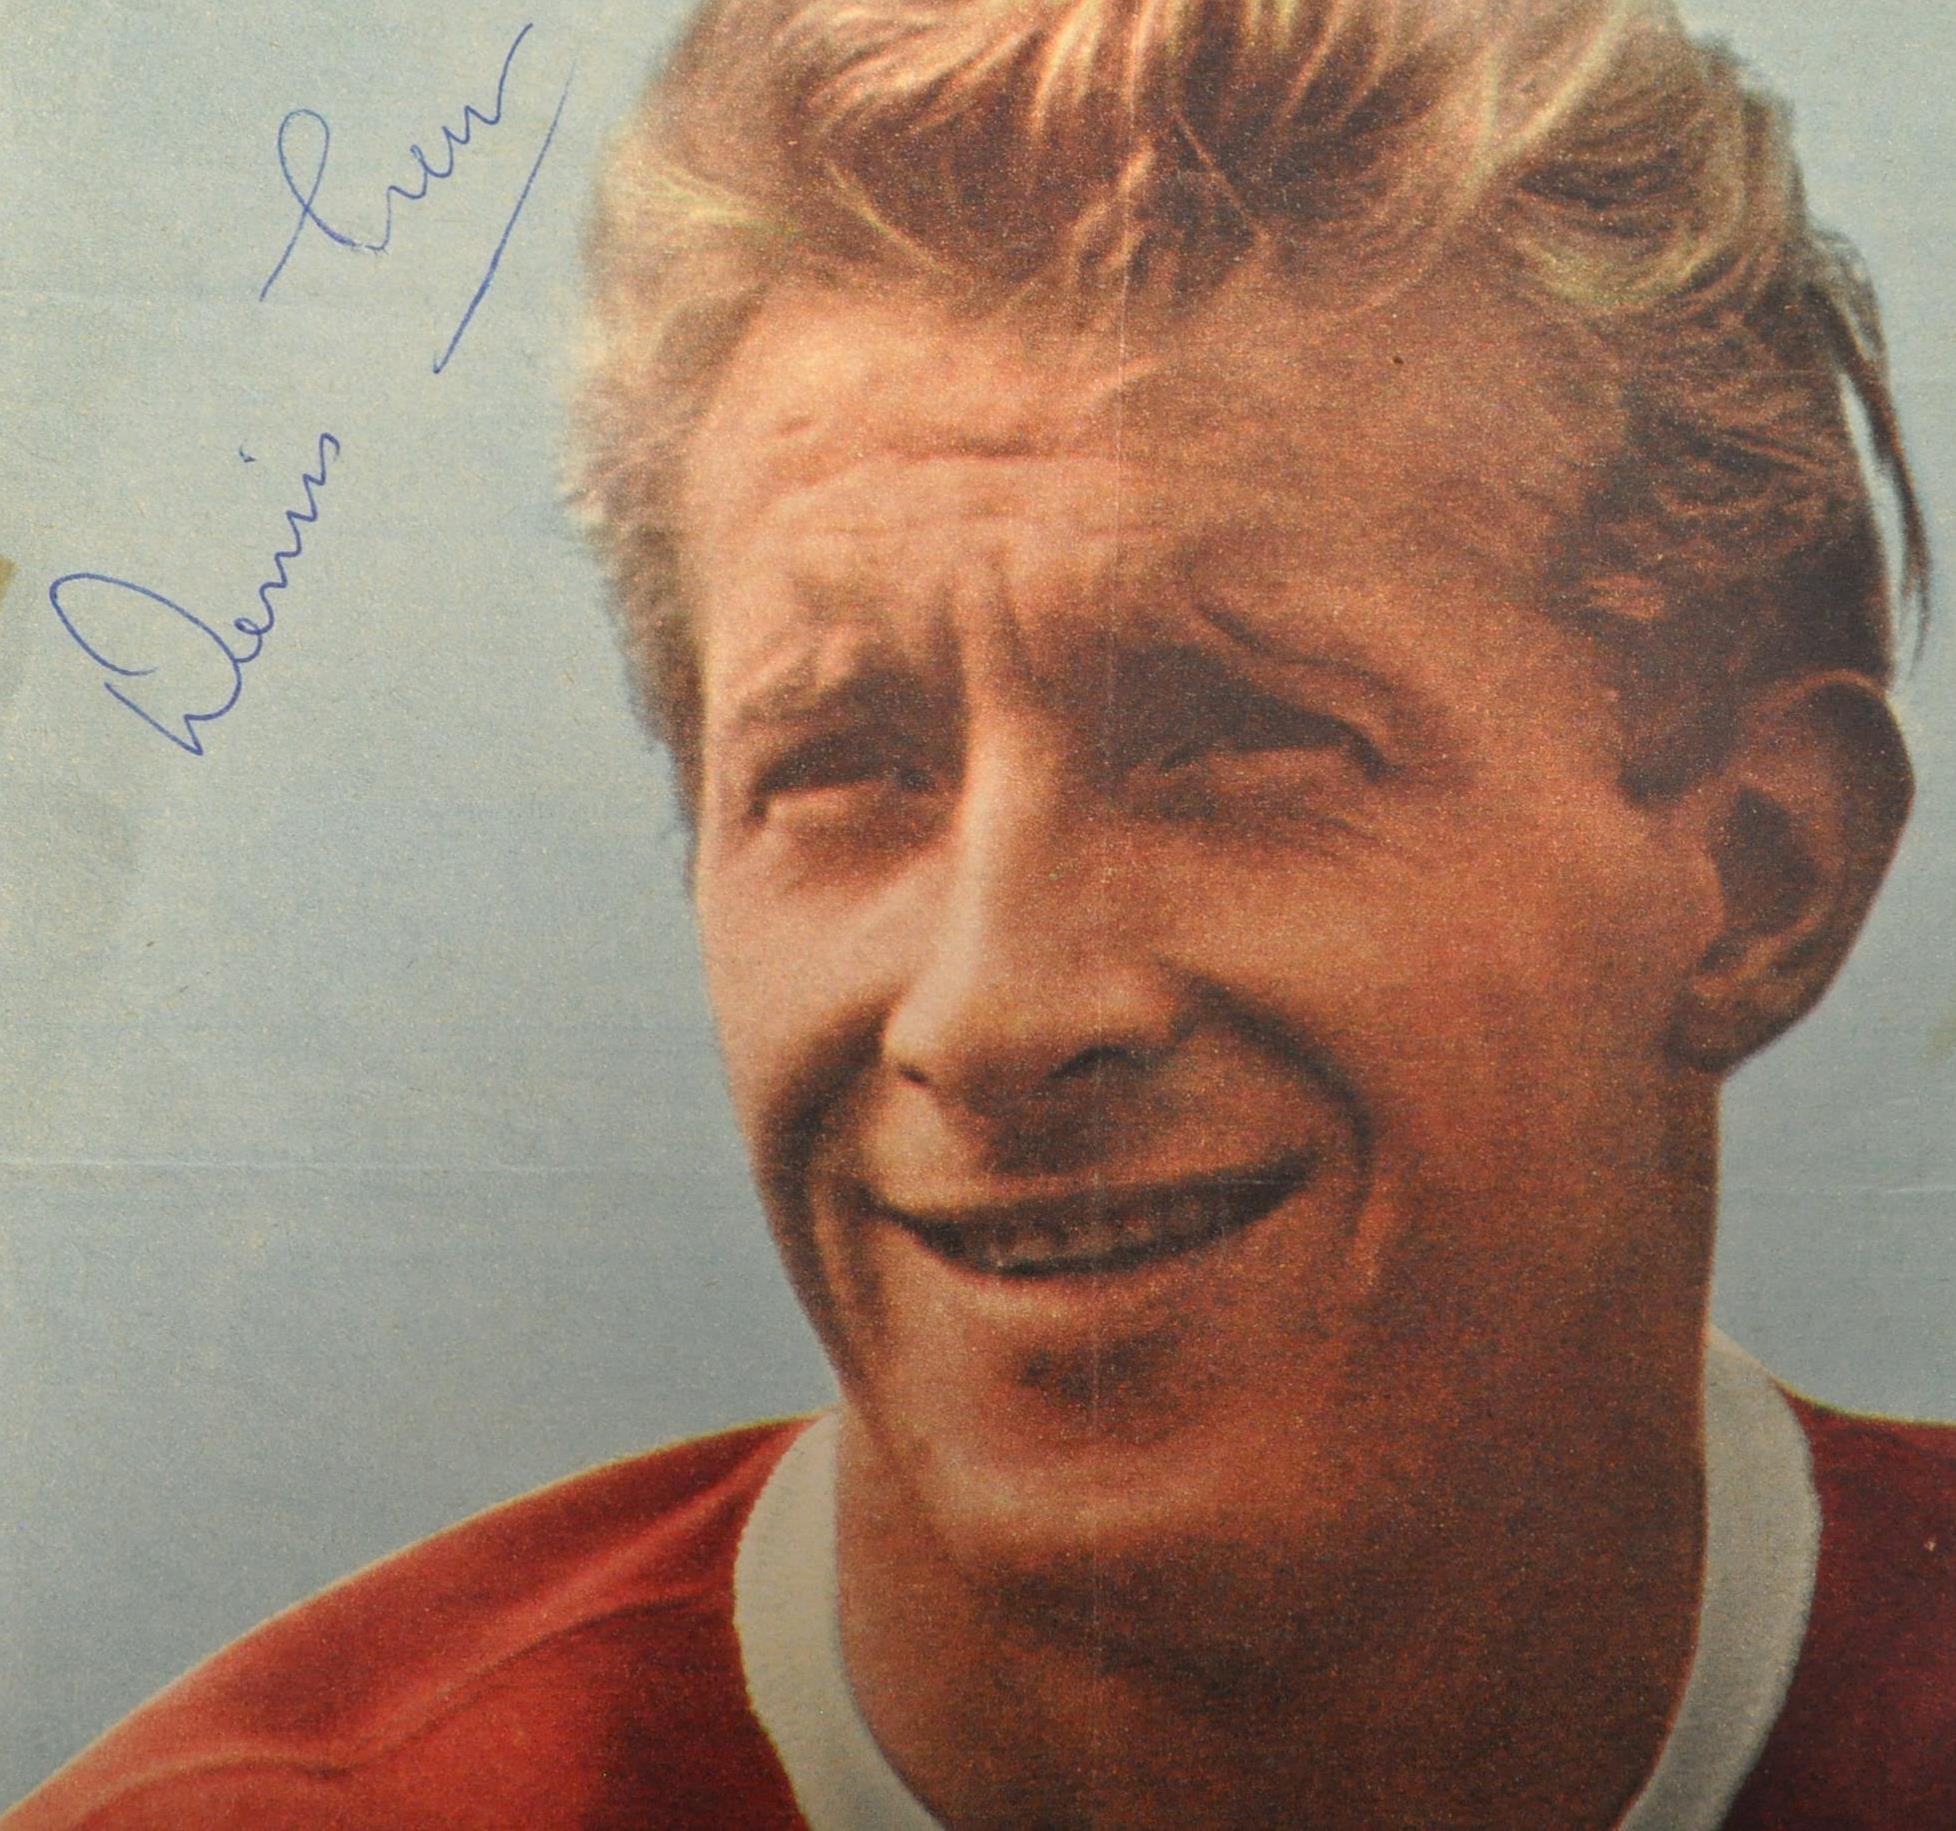 DENIS LAW(1940-PRESENT) - MANCHESTER UNITED - AUTOGRAPH - Image 2 of 3